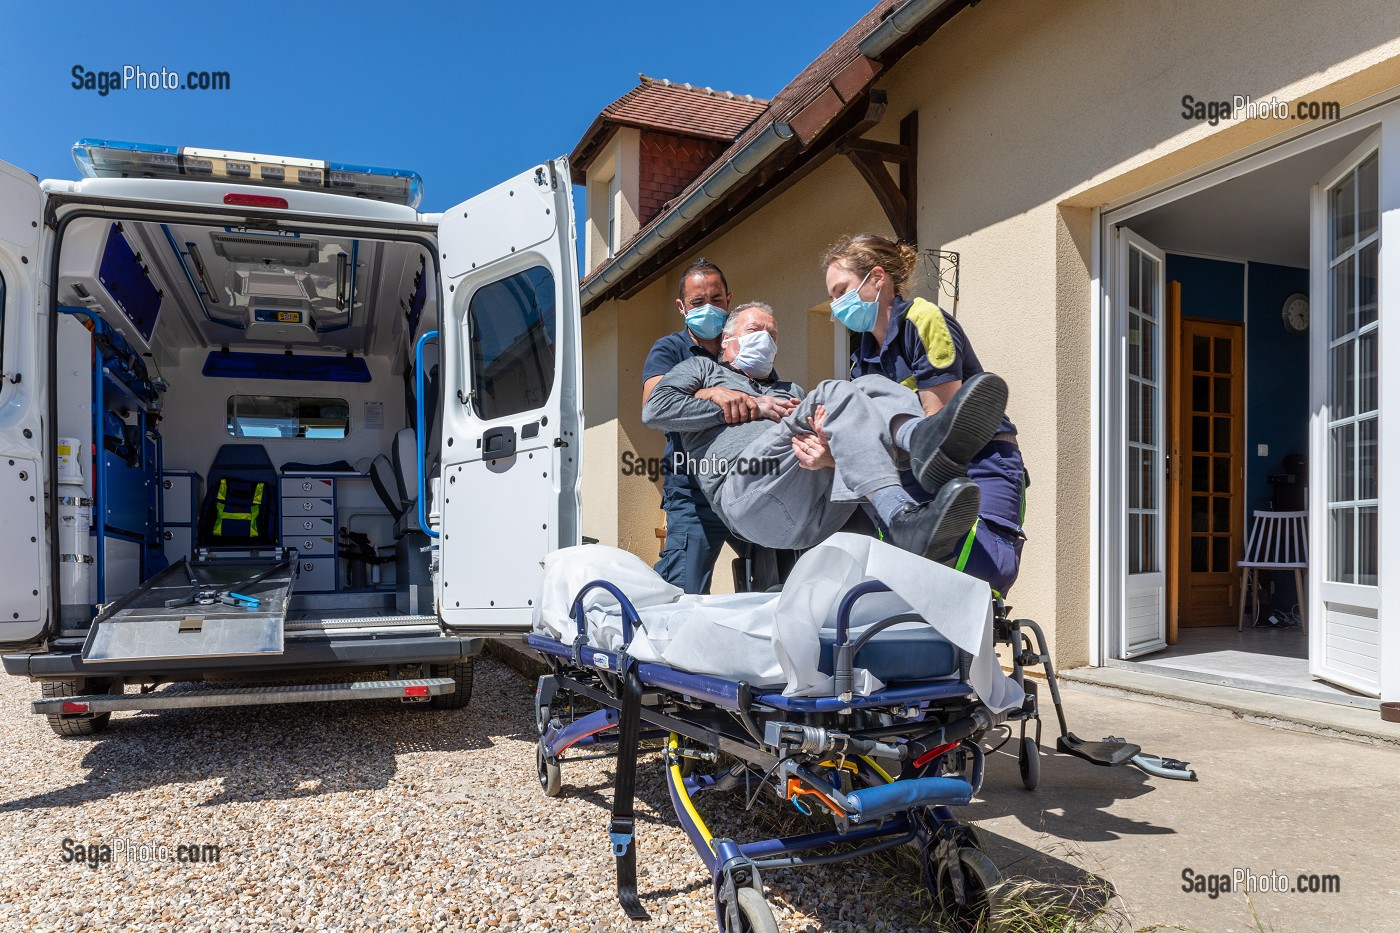 AMBULANCE, ALPHA27, INTERVENTION CHEZ L'HABITANT, PRISE EN AMBULANCE, ALPHA27, INTERVENTION AT A PERSON'S HOME, PUTTING THE PATIENT IN THE AMBULANCE, CHARGE EN PERIODE DE COVID-19, AMBENAY, EURE, NORMANDIE, FRANCE, EUROPE 